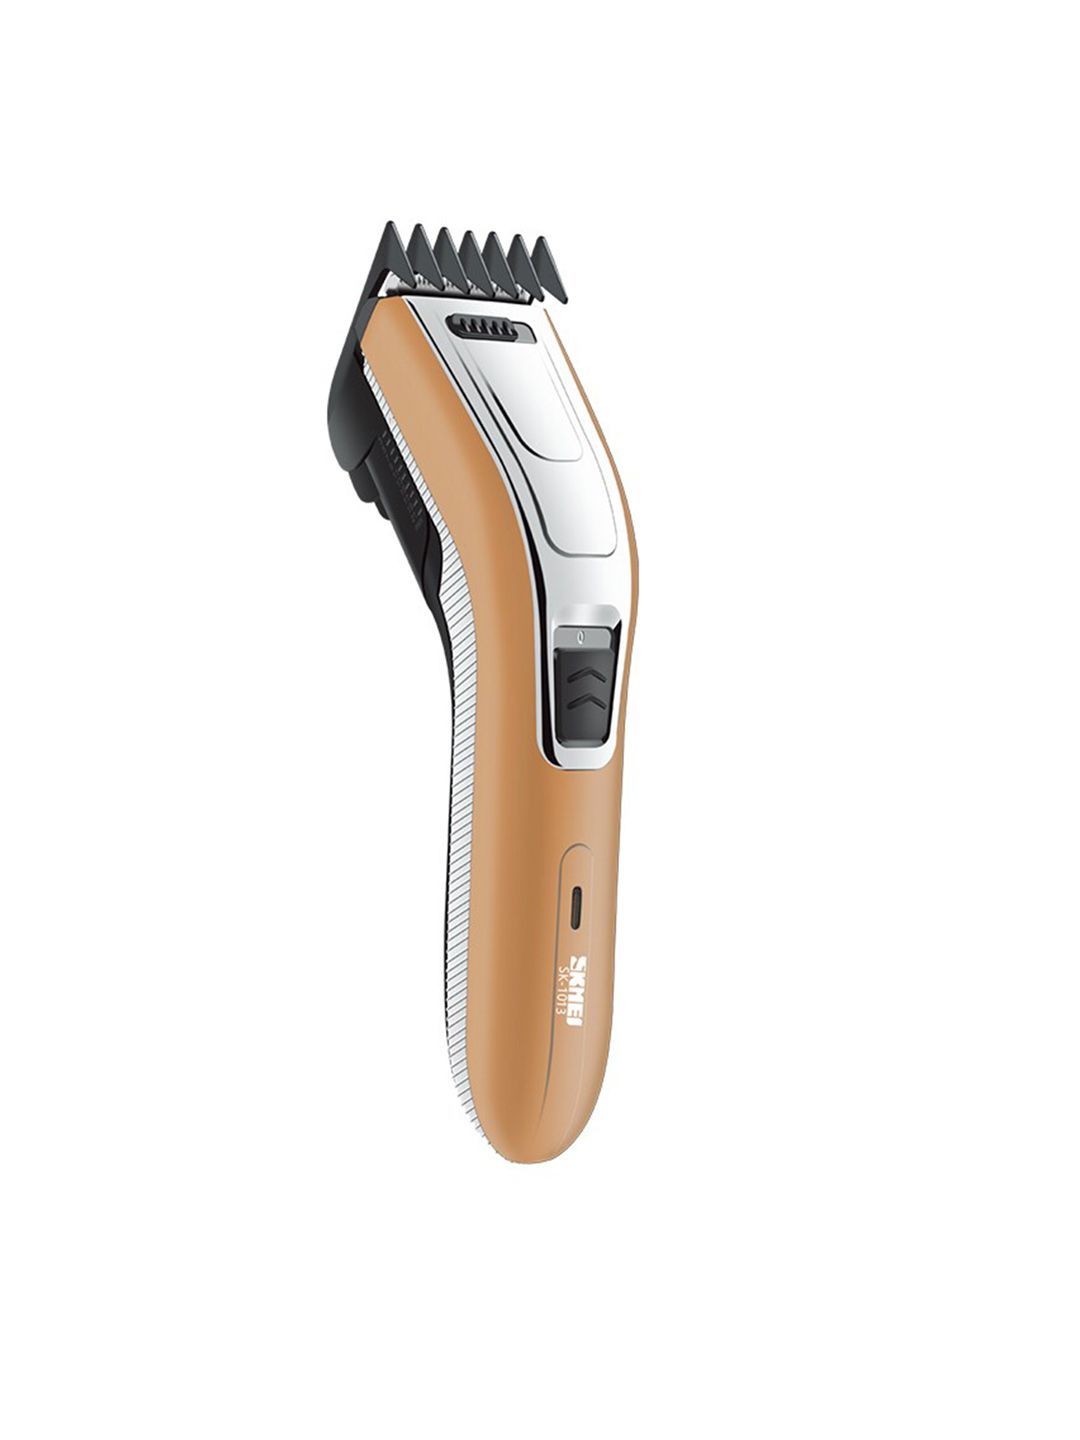 Skmei Beige Rechargeable Stylish Hair Trimmer Price in India